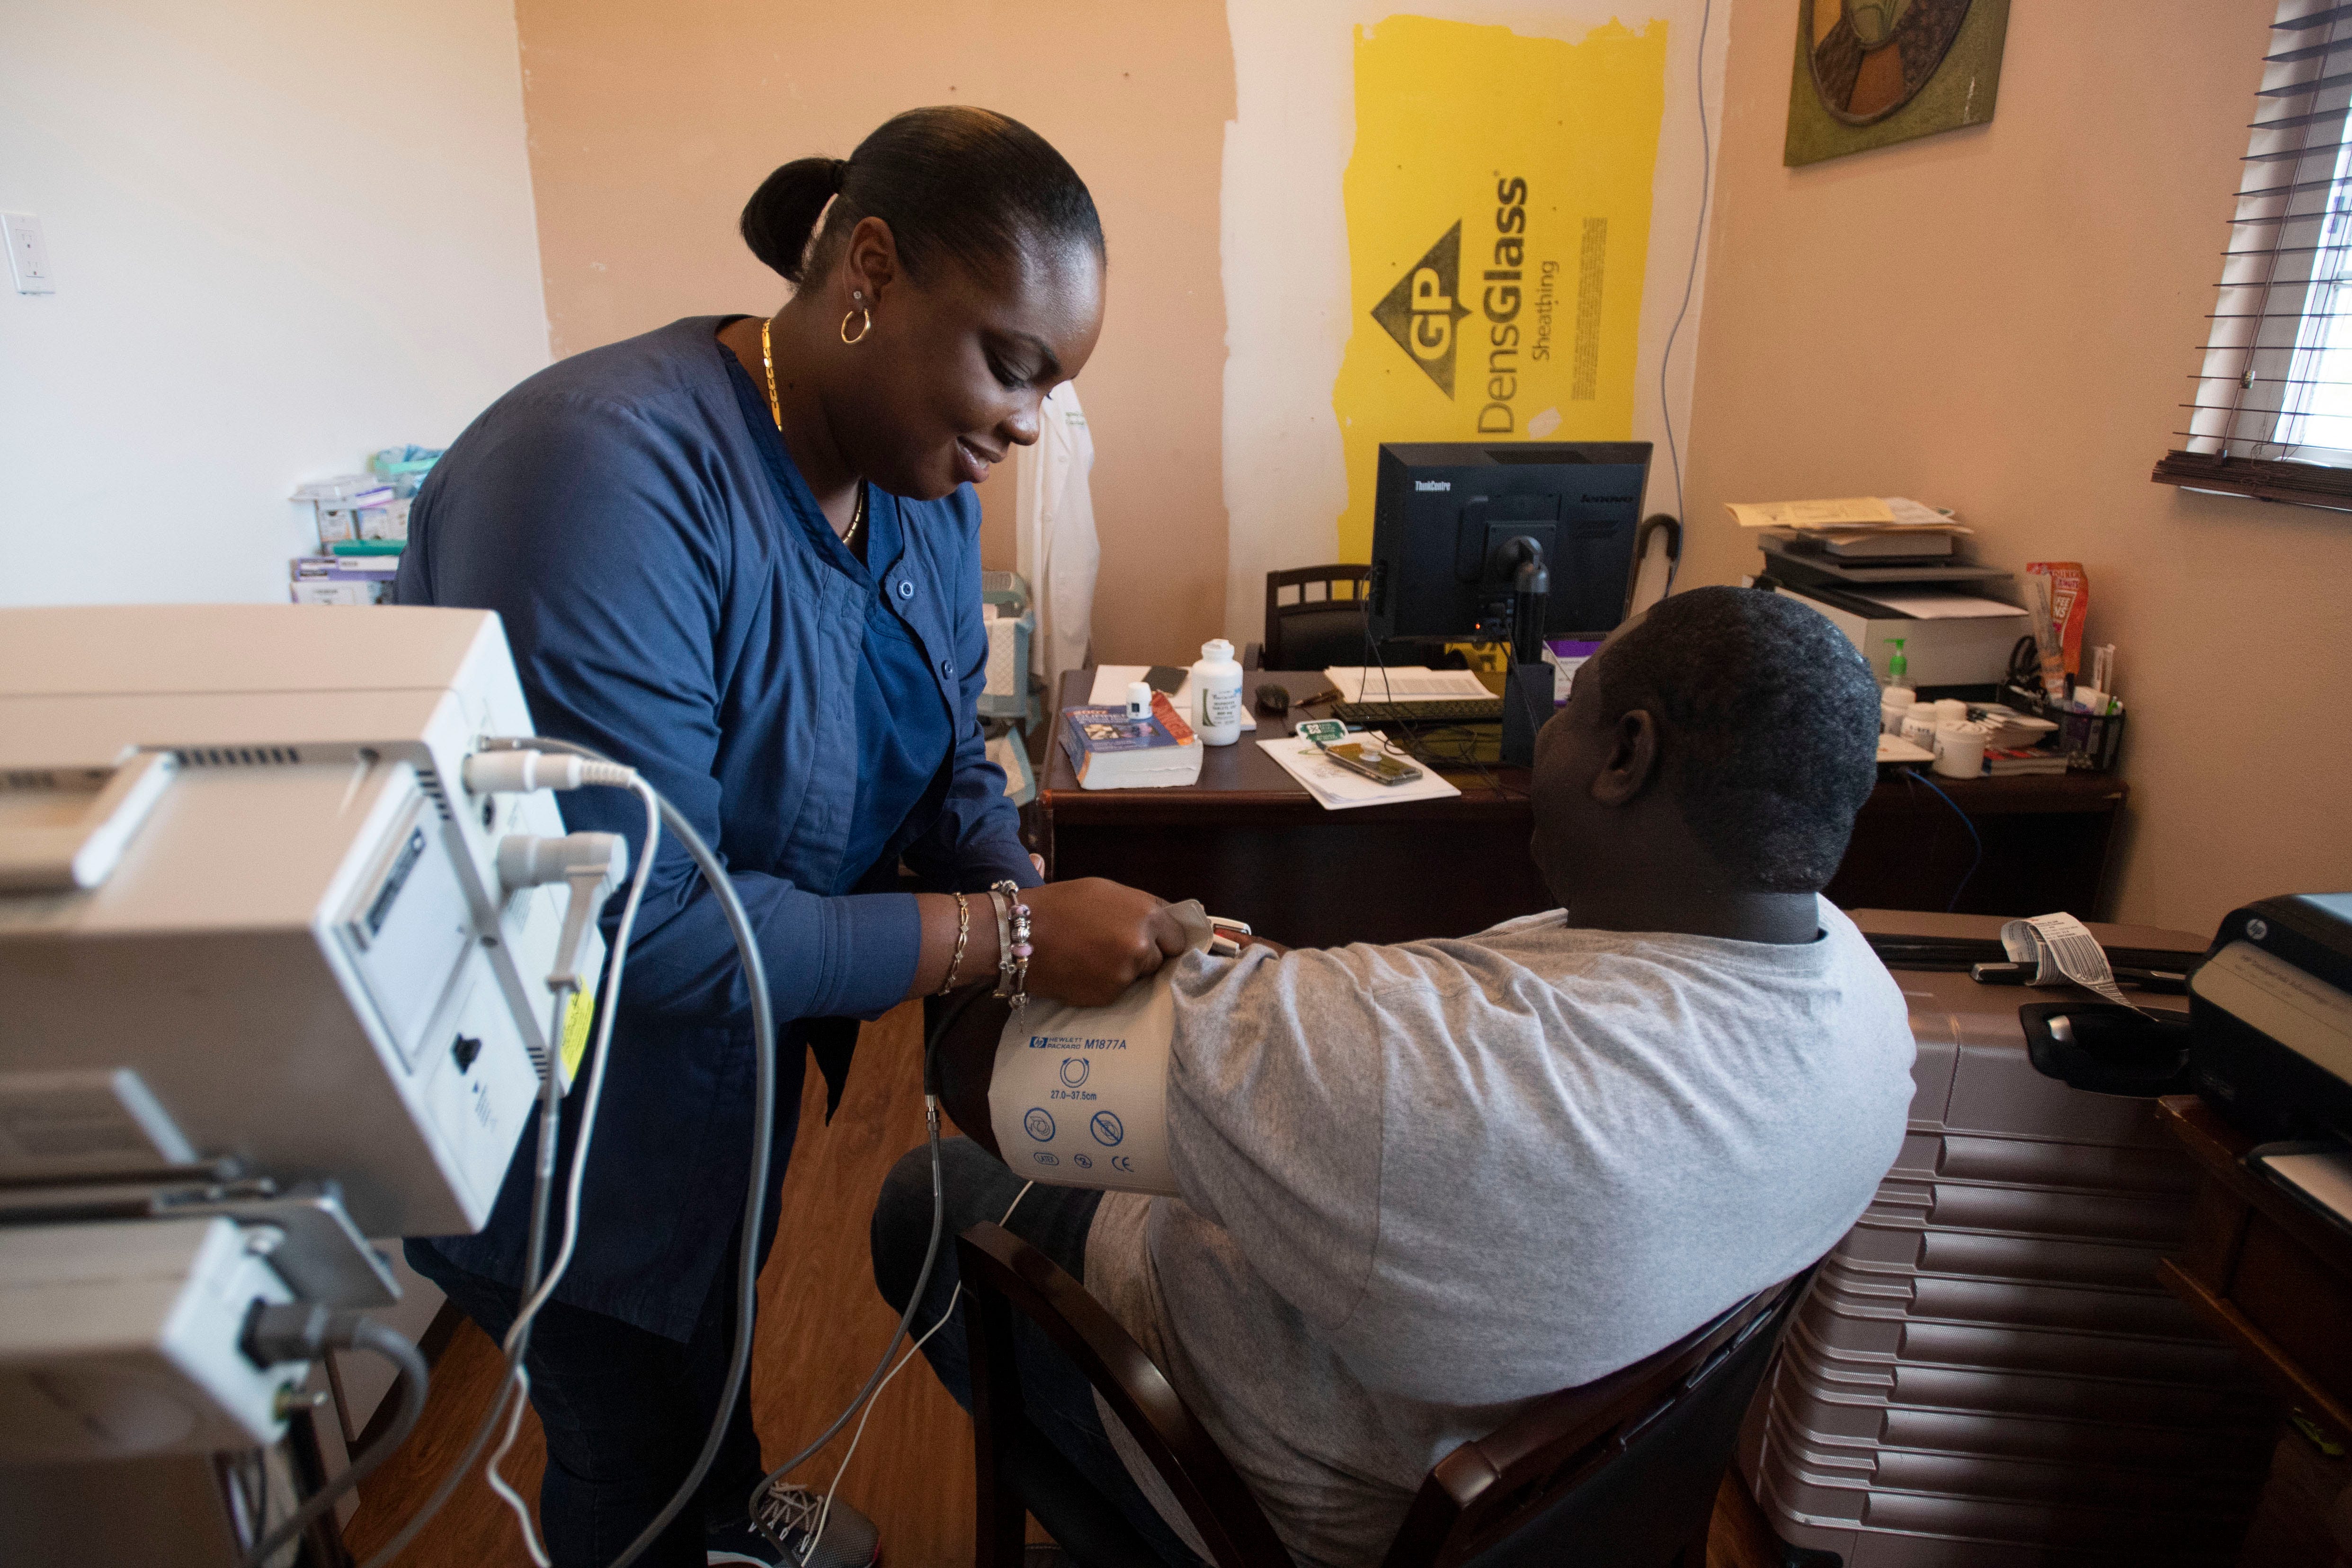 Integrated Medical Centre nurse Chenara Edwards conducts a checkup on patient Ryan Forbes on Saturday, Dec. 21, 2019, at a funeral home turned medical clinic in Marsh Harbour, Bahamas.